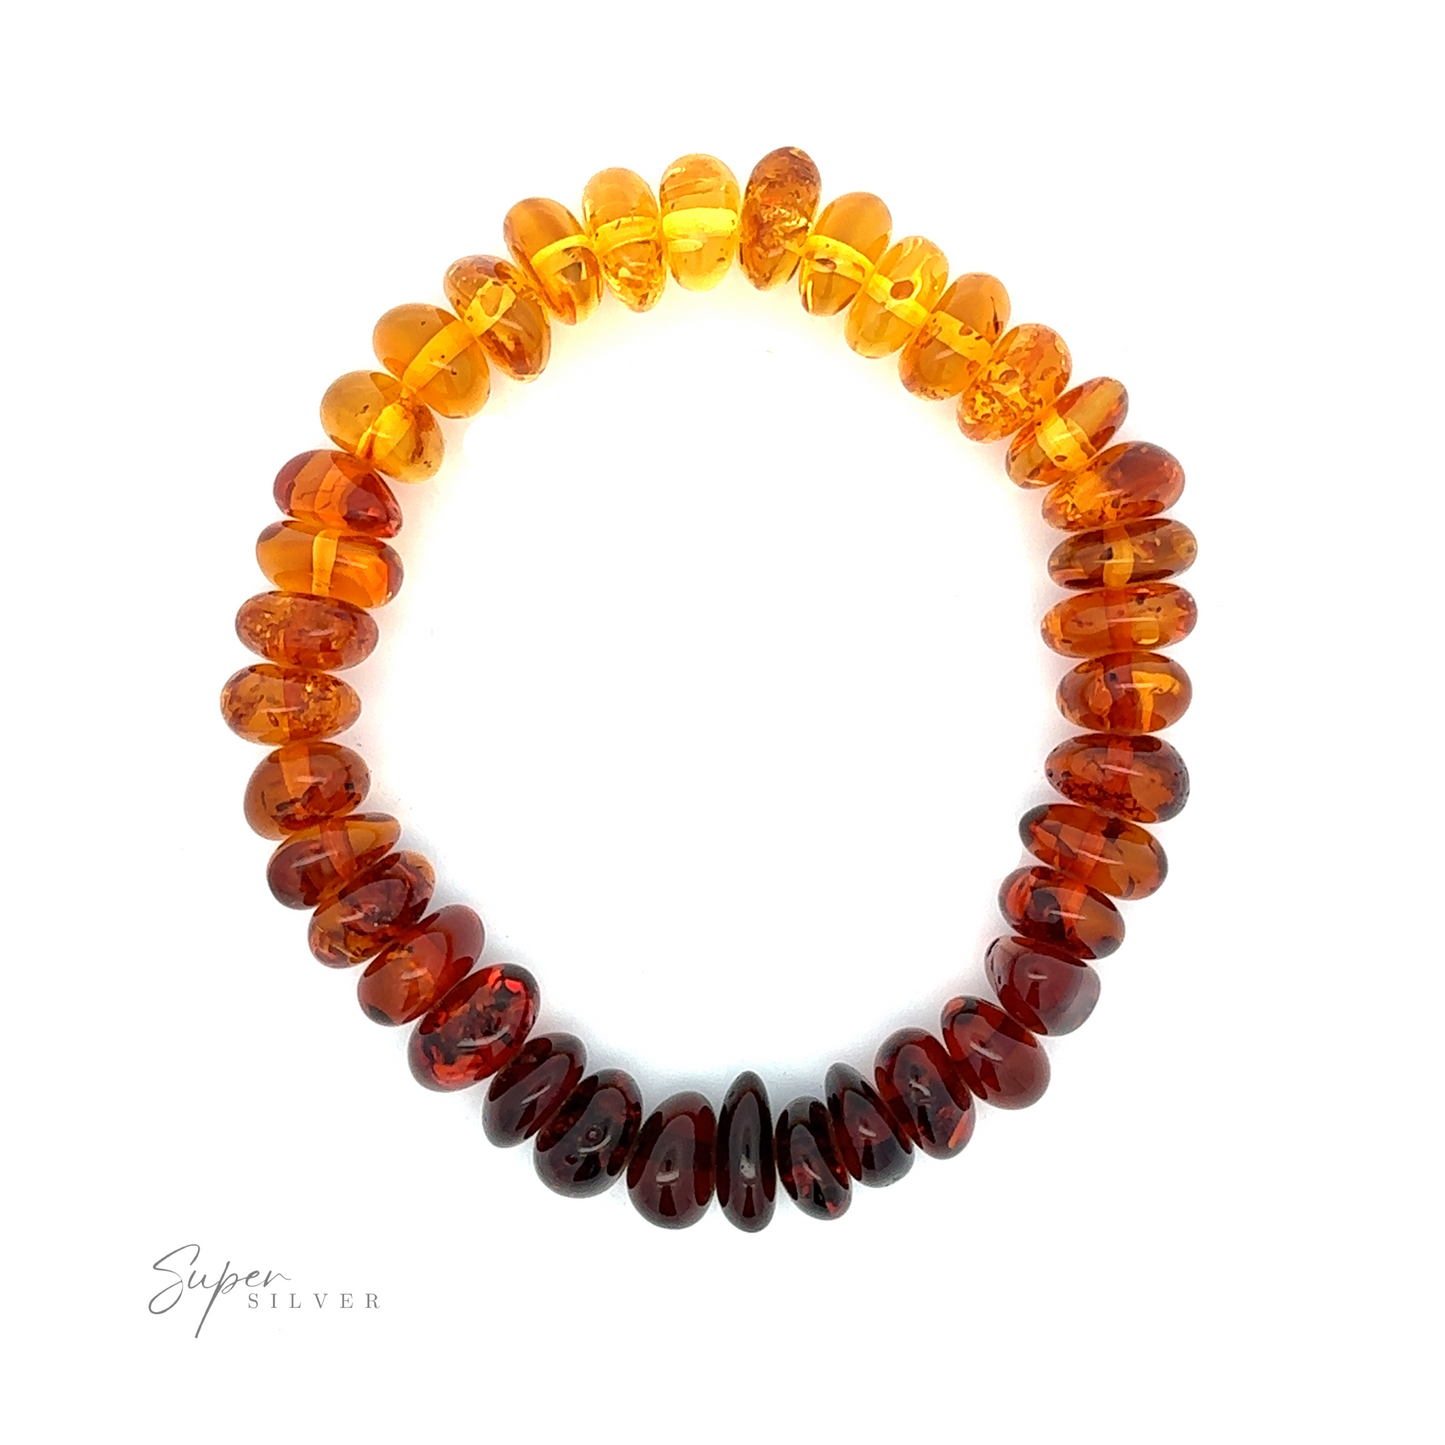 Amber-colored Outstanding Baltic Amber Rondelle Beaded Bracelet arranged in a circular shape against a white background, transitioning from dark amber at the bottom to lighter amber at the top. The words "Super Silver" appear on the left side, enhancing its boho vintage style.